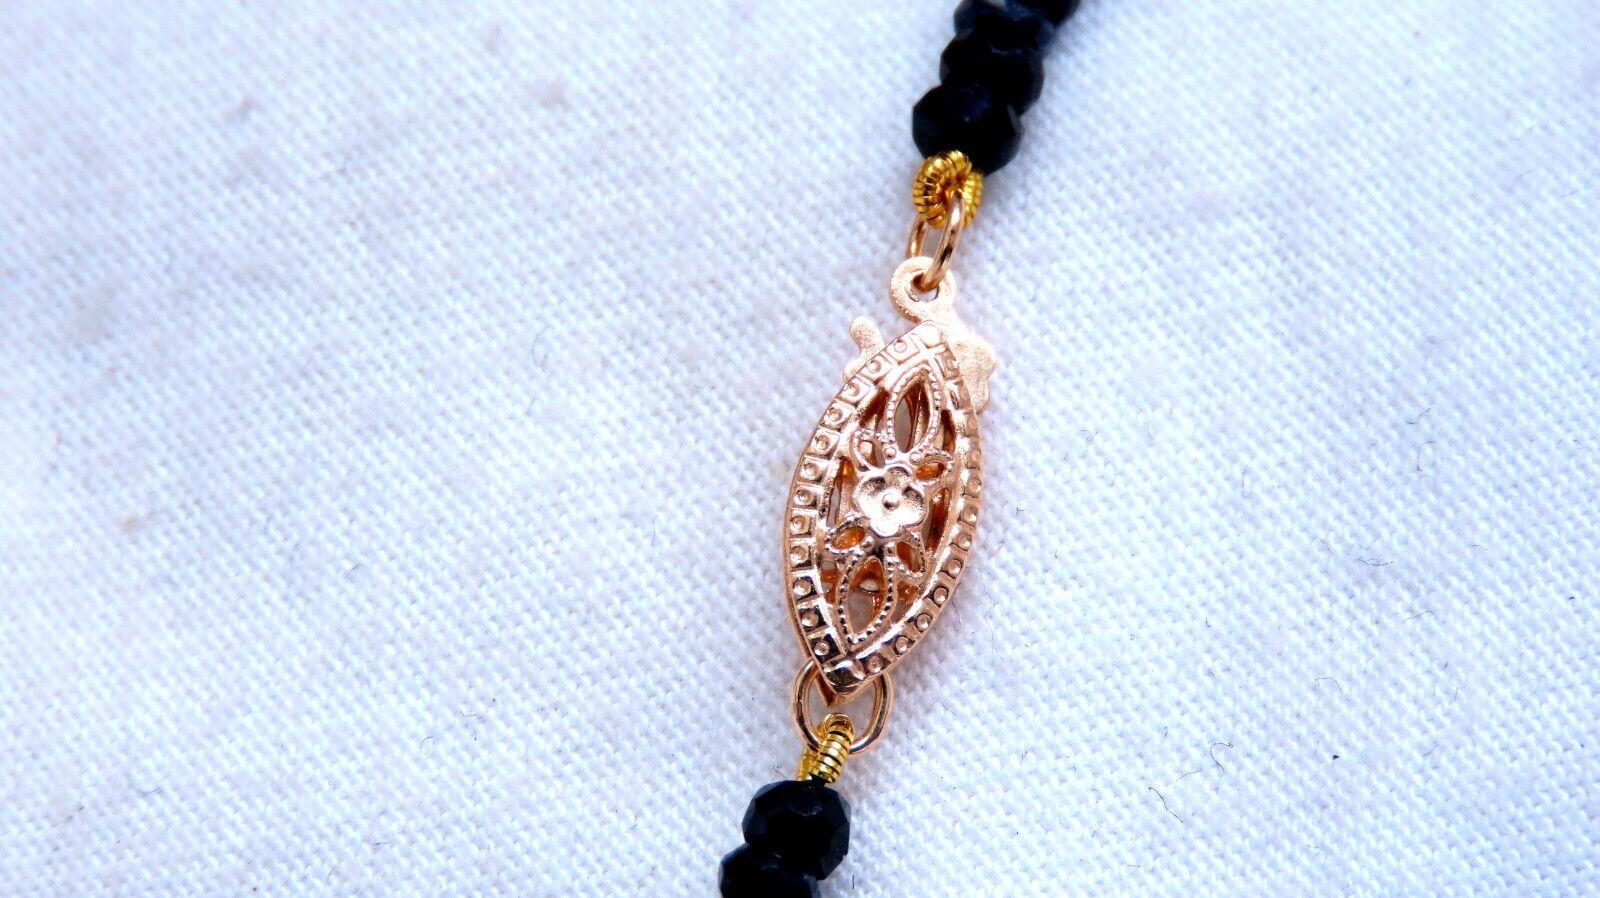 63ct natural Sapphire bead necklace 14 karat clasp Antique Onyx Drop Pendant In New Condition For Sale In New York, NY